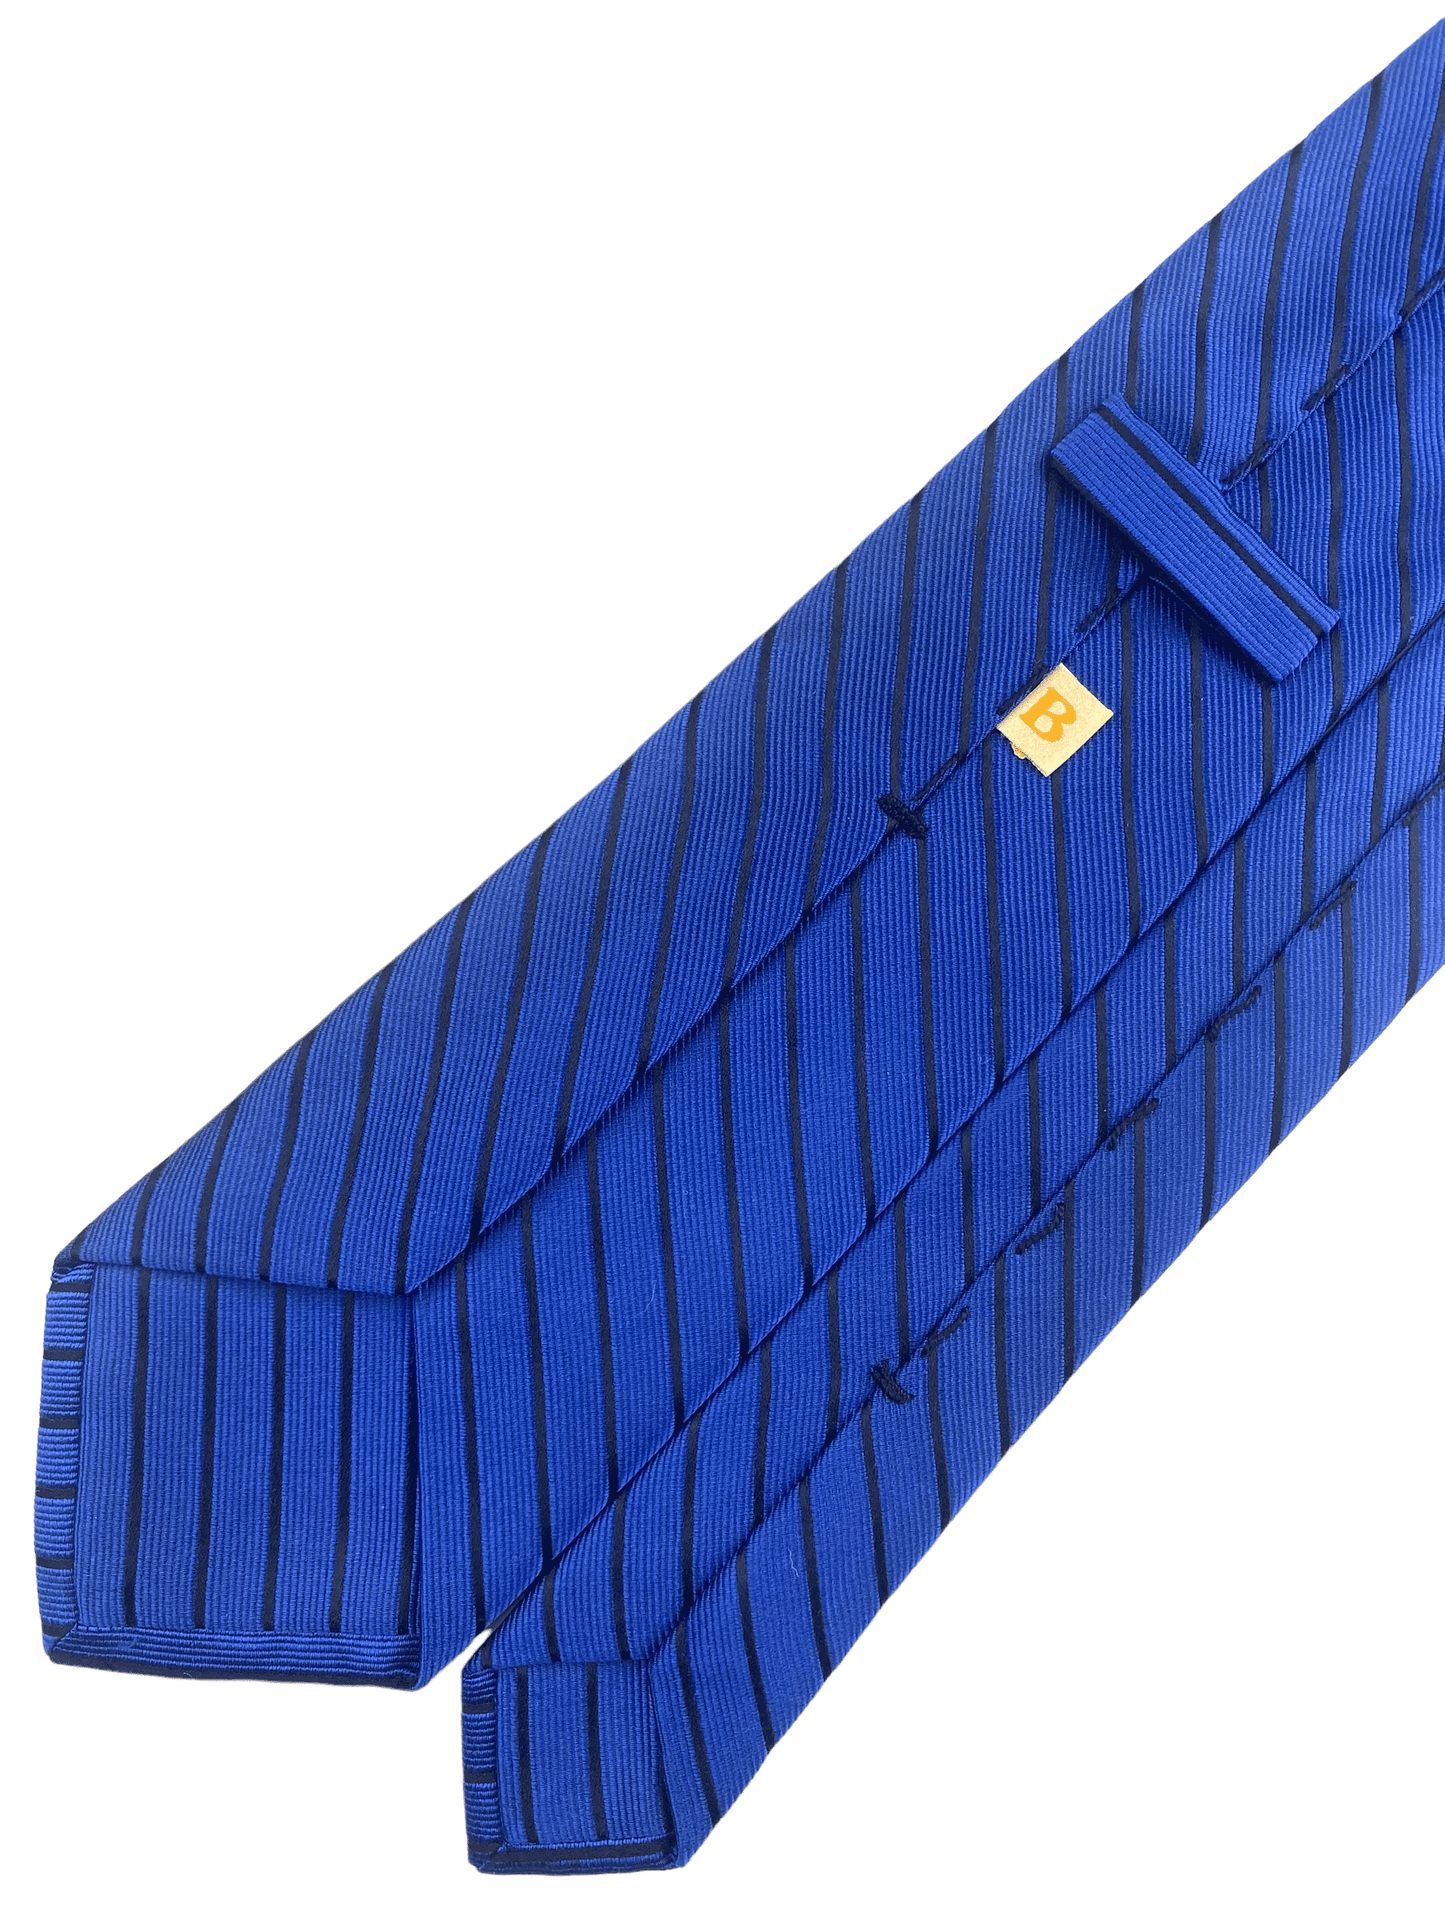 "B" Blue Striped Silk Tie - Genuine Design luxury consignment Calgary, Alberta, Canada New & pre-owned clothing, shoes, accessories.